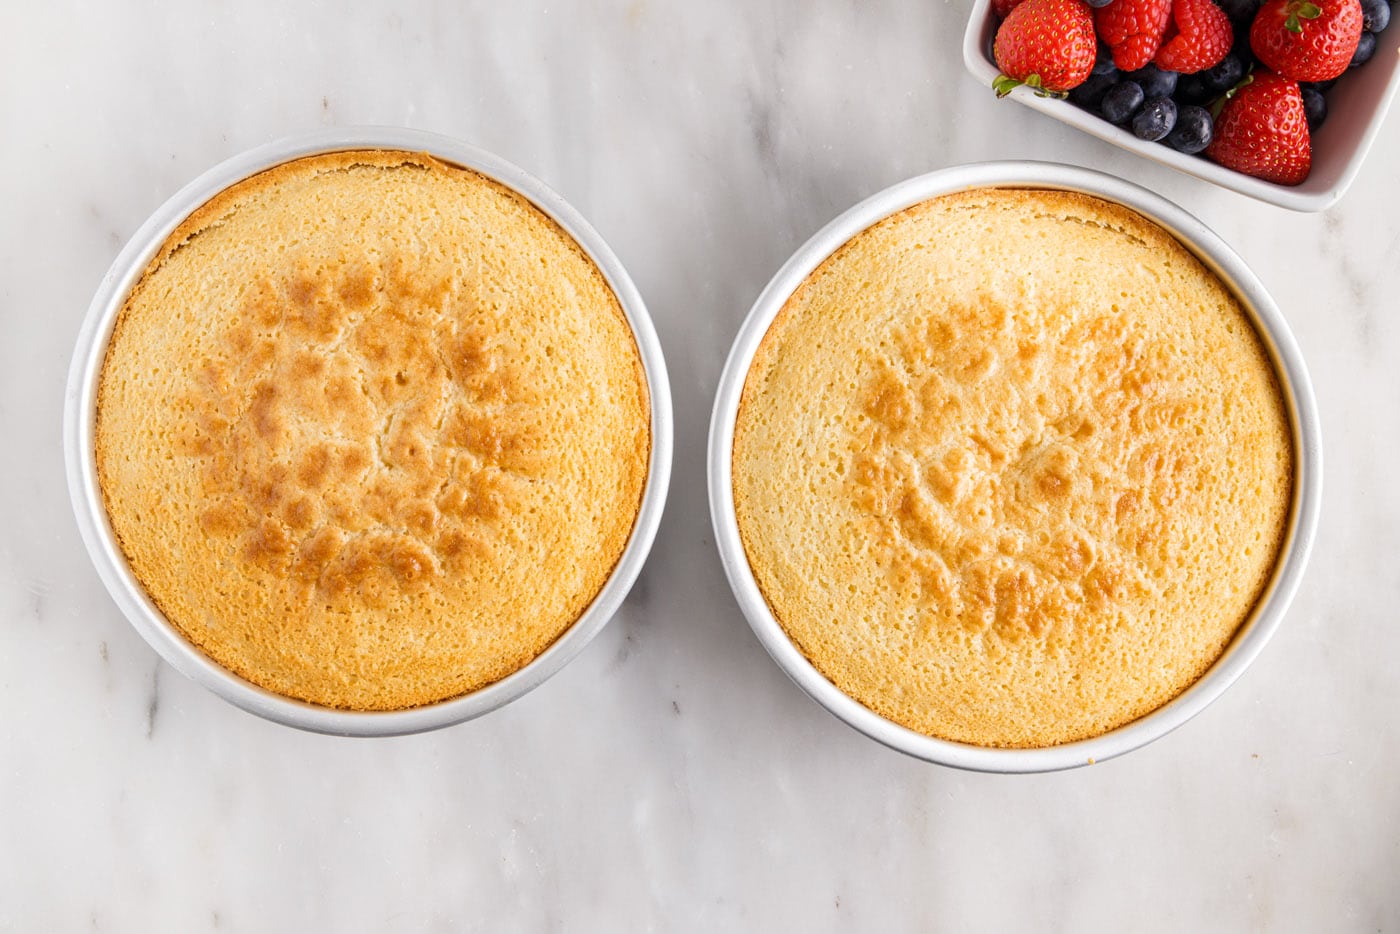 two cakes baked in a pan